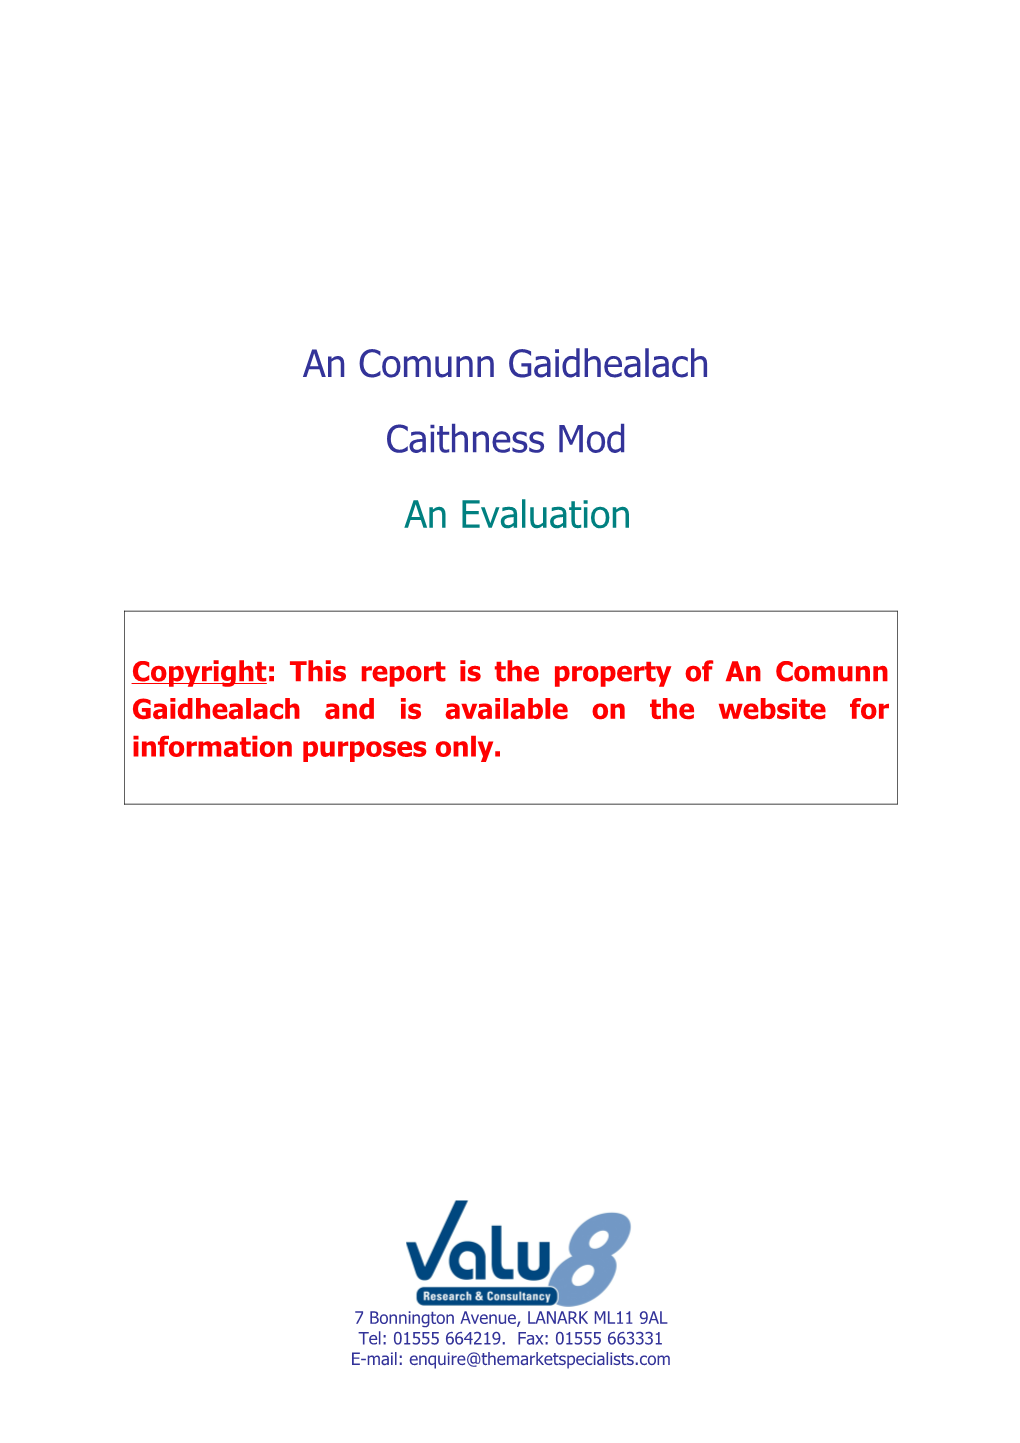 Copyright: This Report Is the Property of an Comunn Gaidhealach and Is Available on The